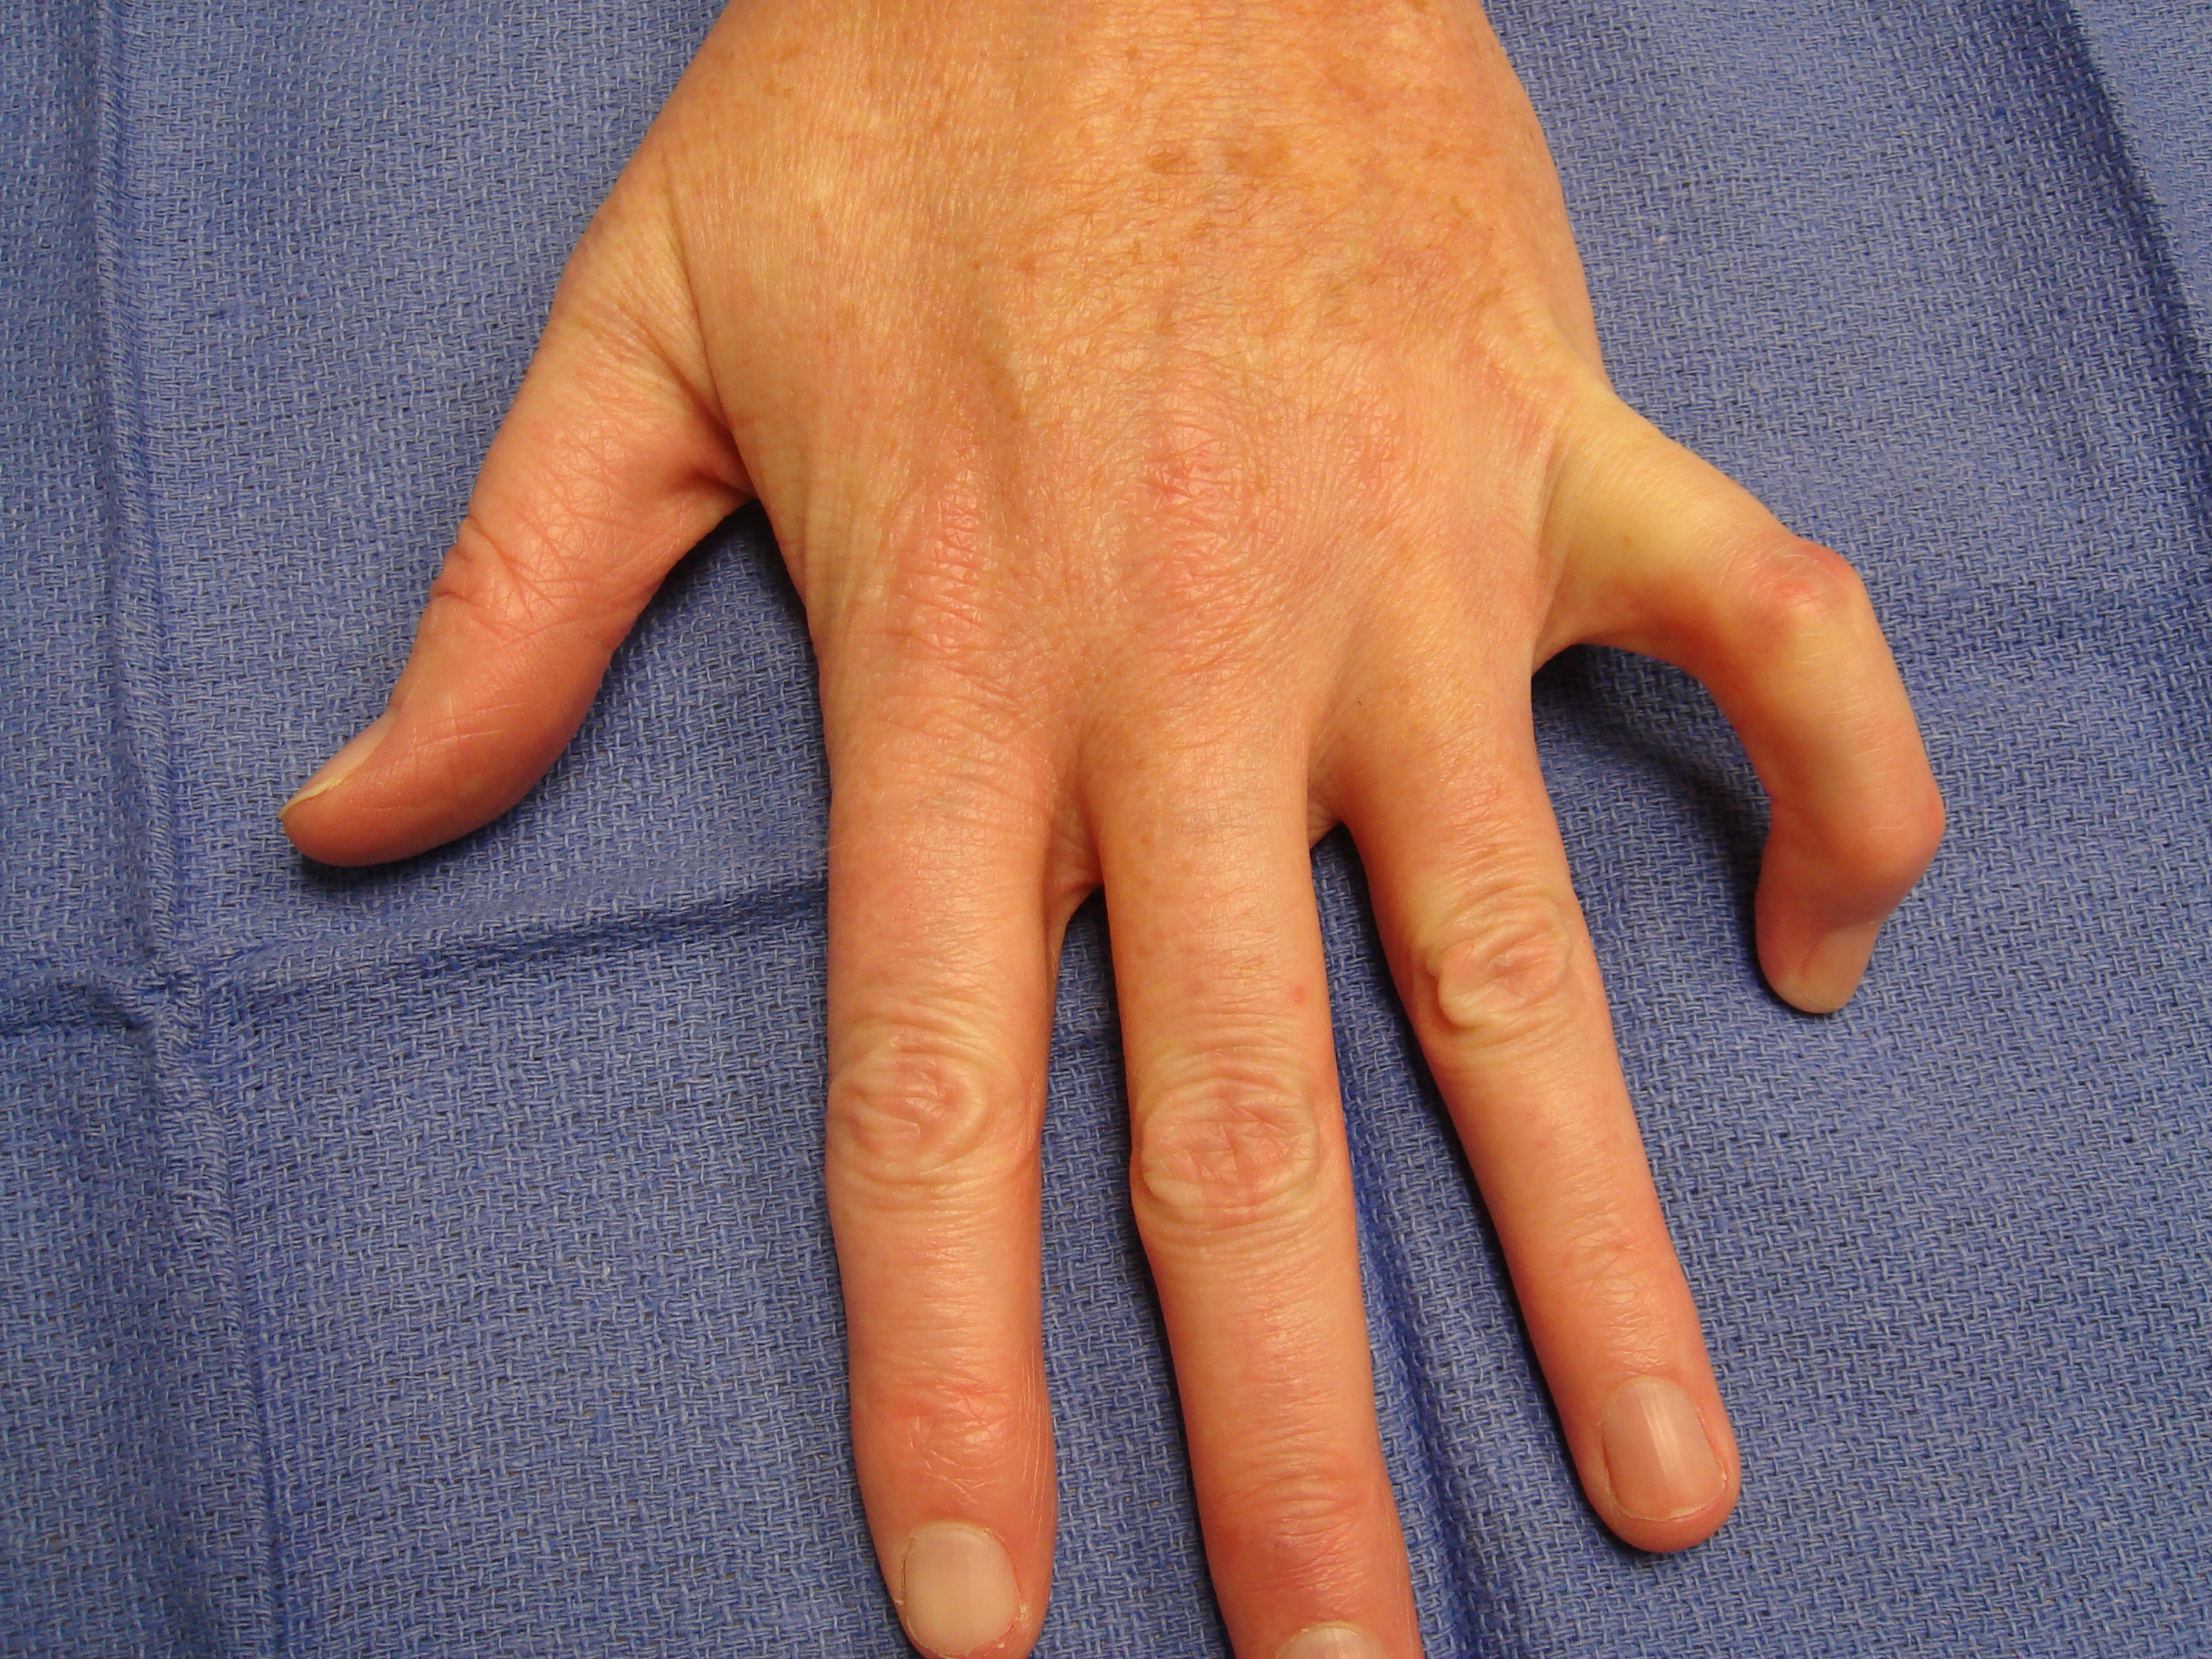 Figure 8a: These images show a woman in her mid-50s with a significant, little-finger, combined (contiguous cord) PIP and DIP contracture. The MP joint was not affected. The injection and manipulation videos depict custom adaptation of the “safe technique” for such an unusual cases.